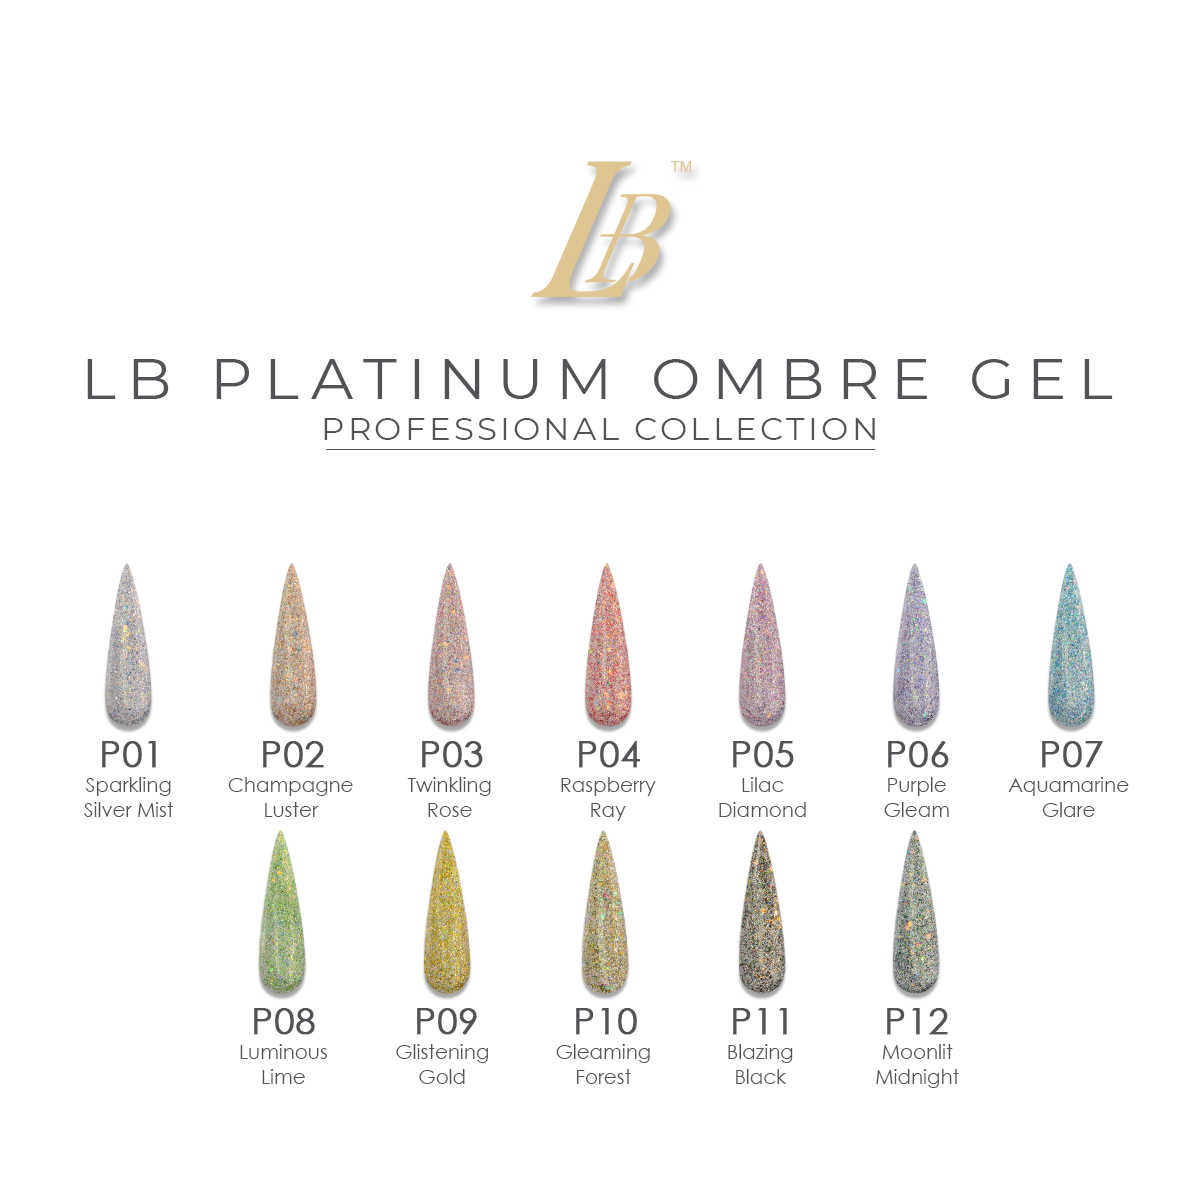 Platinum Ombre Gel Professional Collection